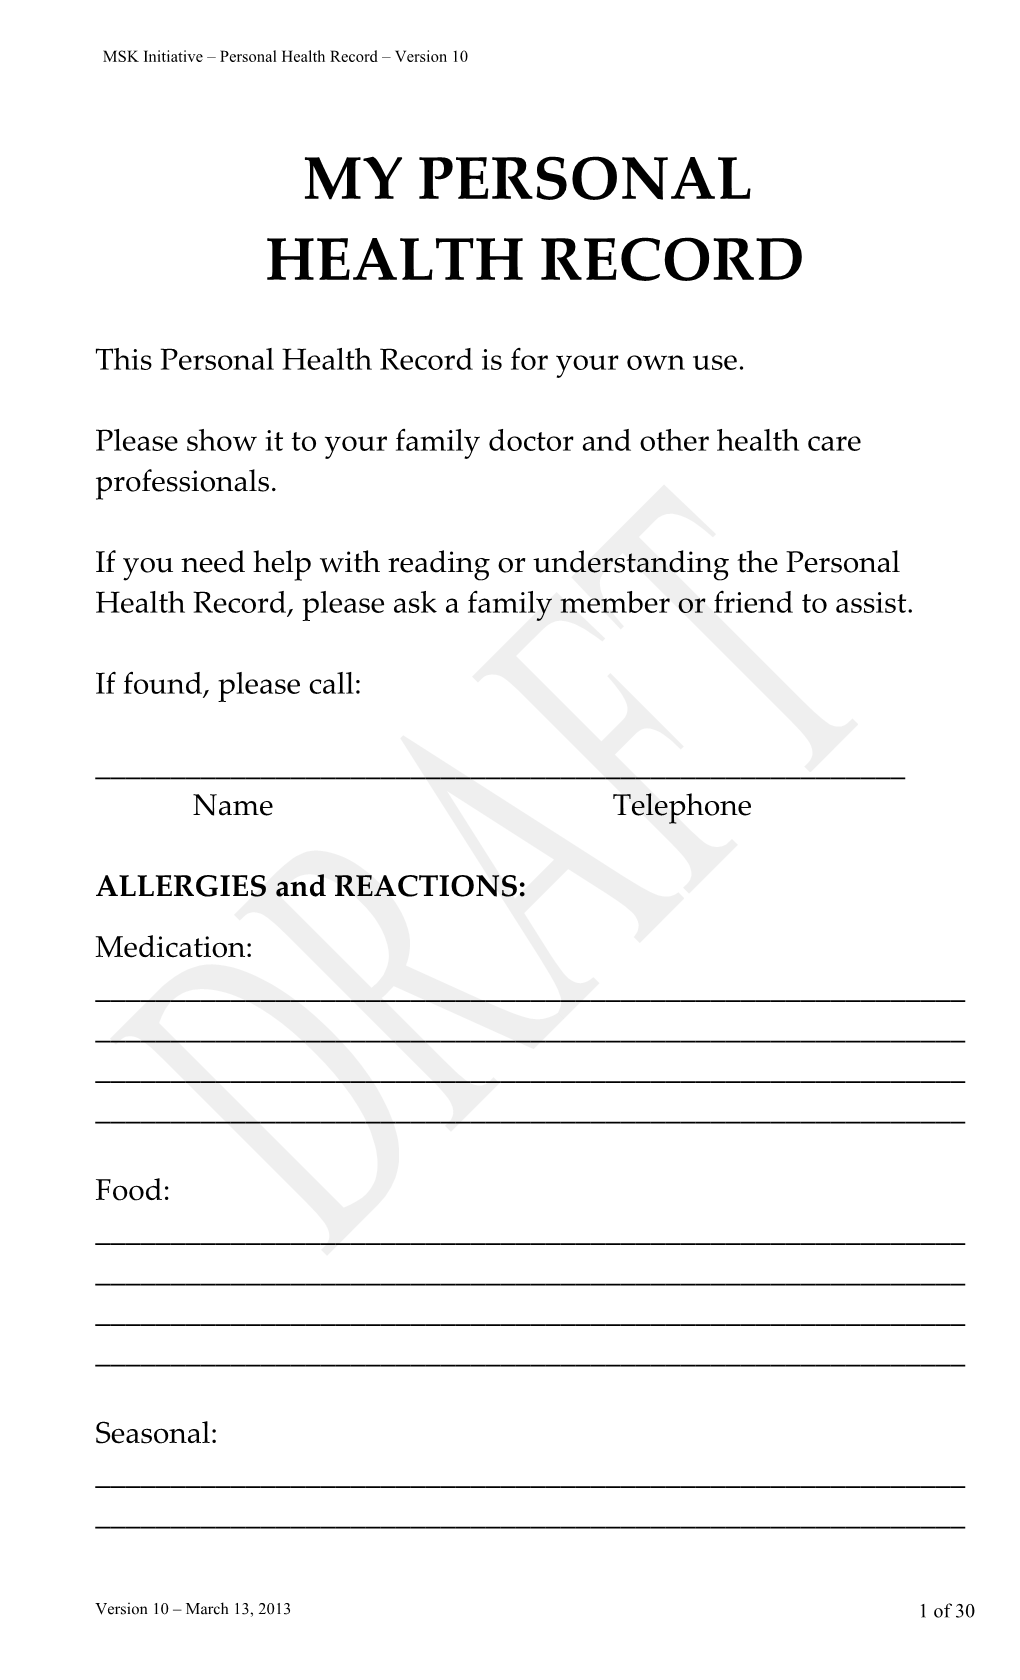 This Personal Health Record Is for Your Own Use